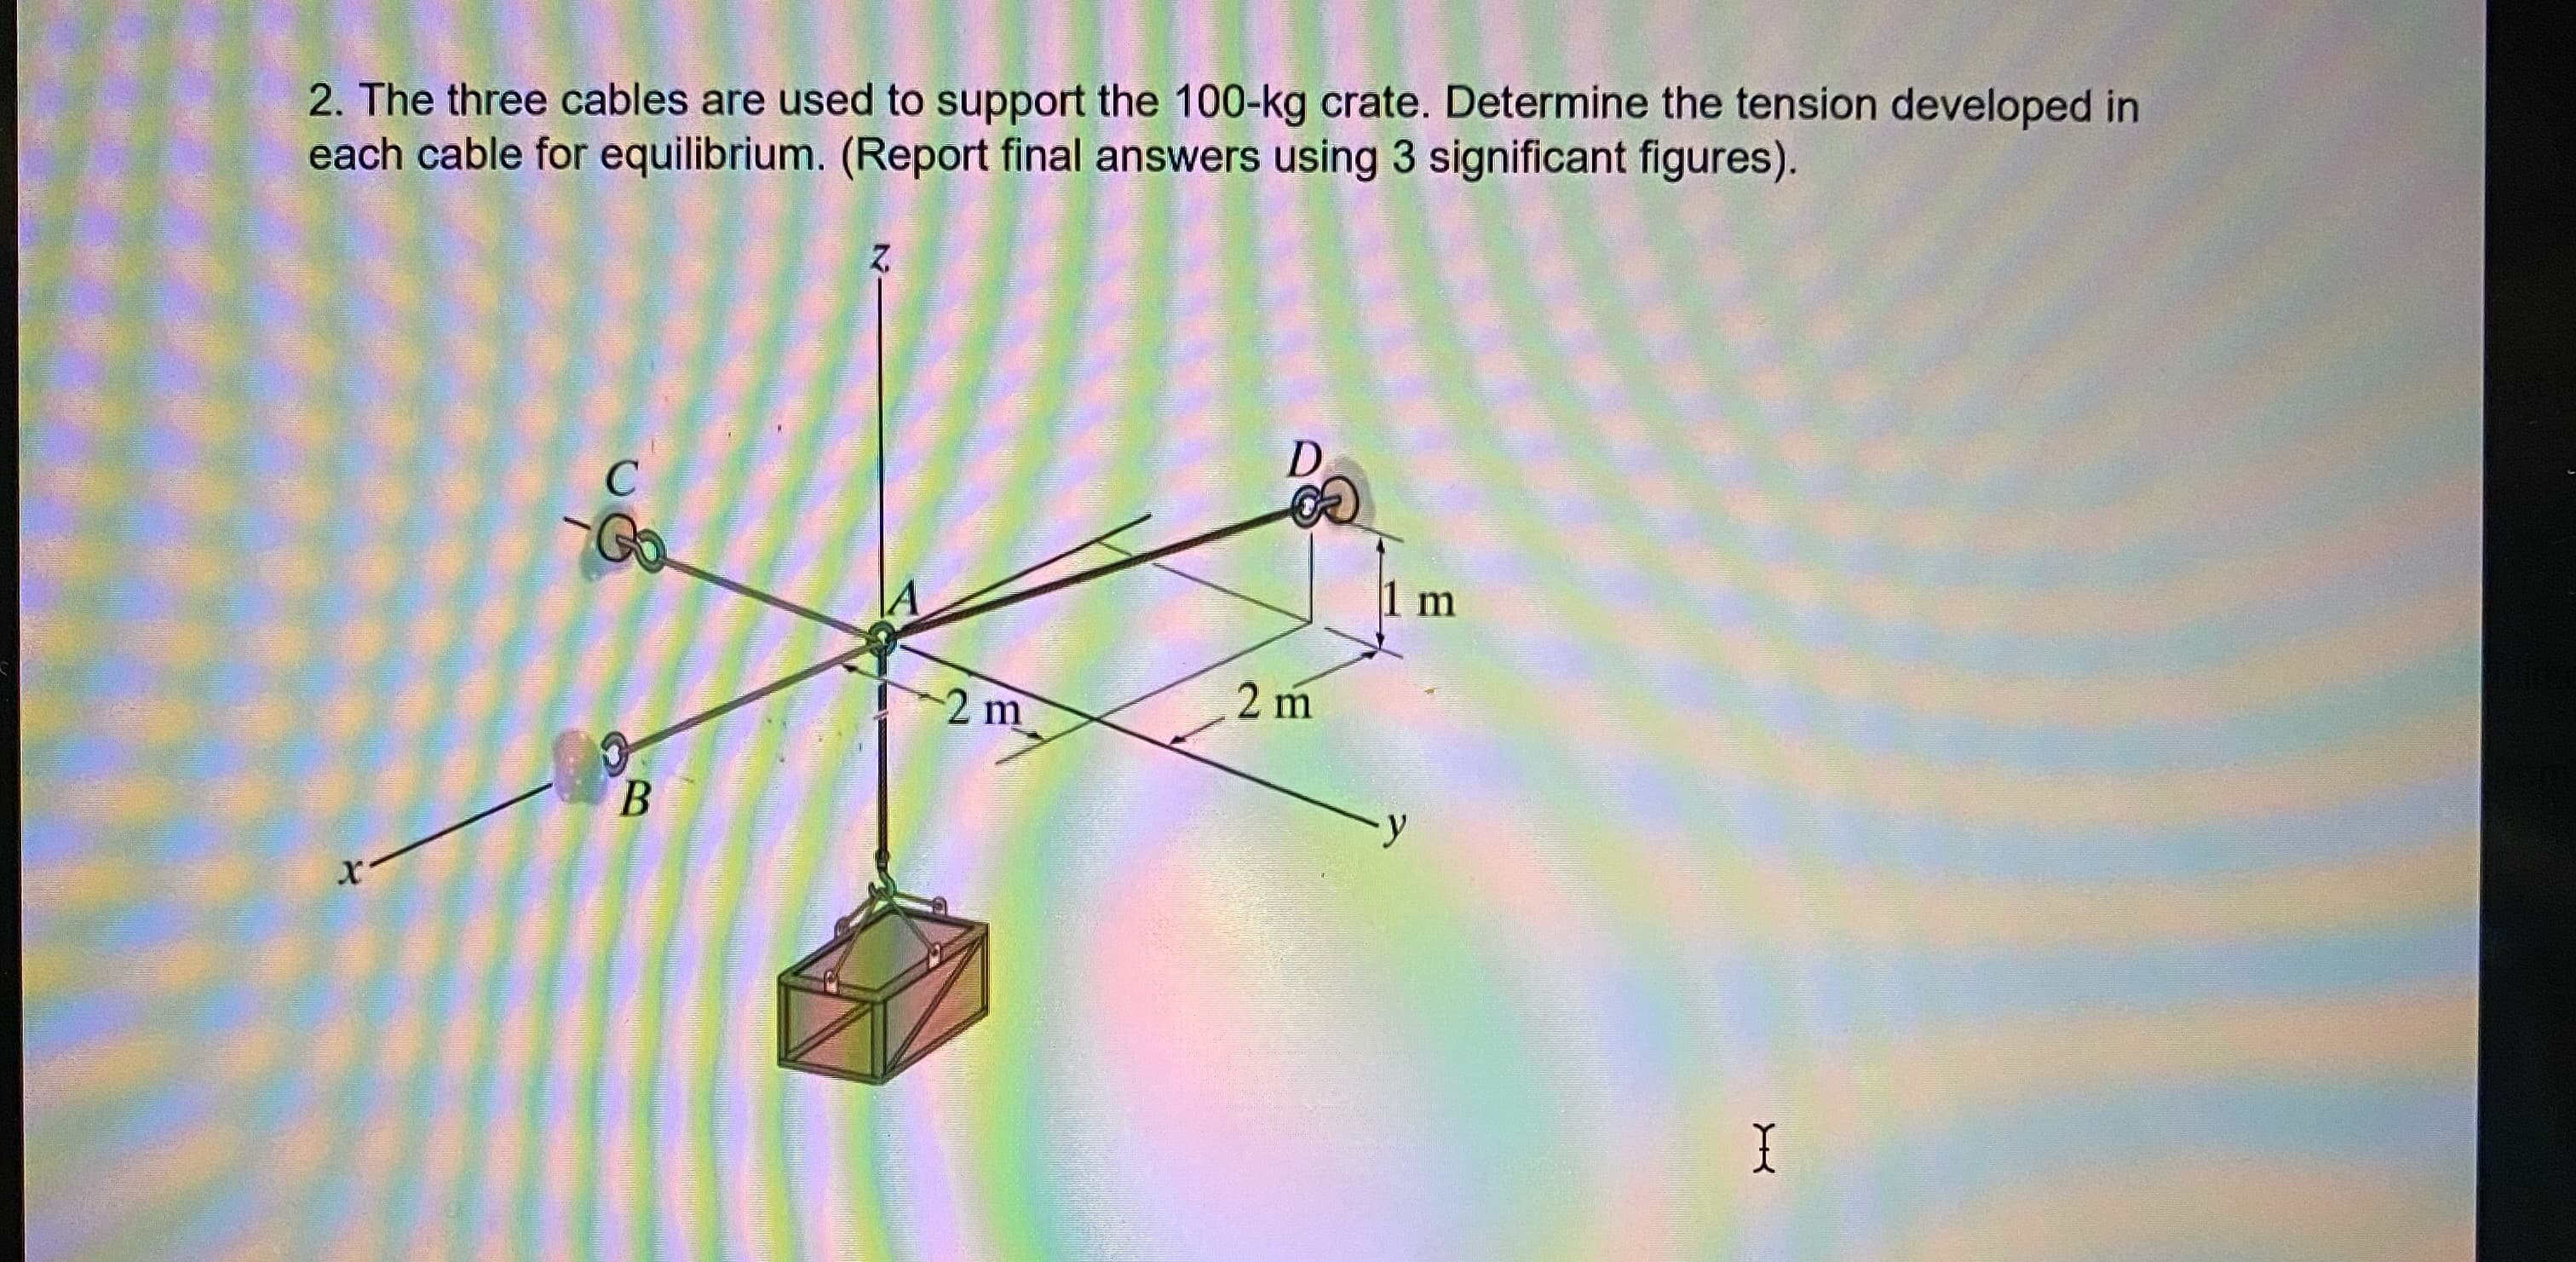 2. The three cables are used to support the 100-kg crate. Determine the tension developed in
each cable for equilibrium. (Report final answers using 3 significant figures).
D
Go.
1 m
2 m
2 m
